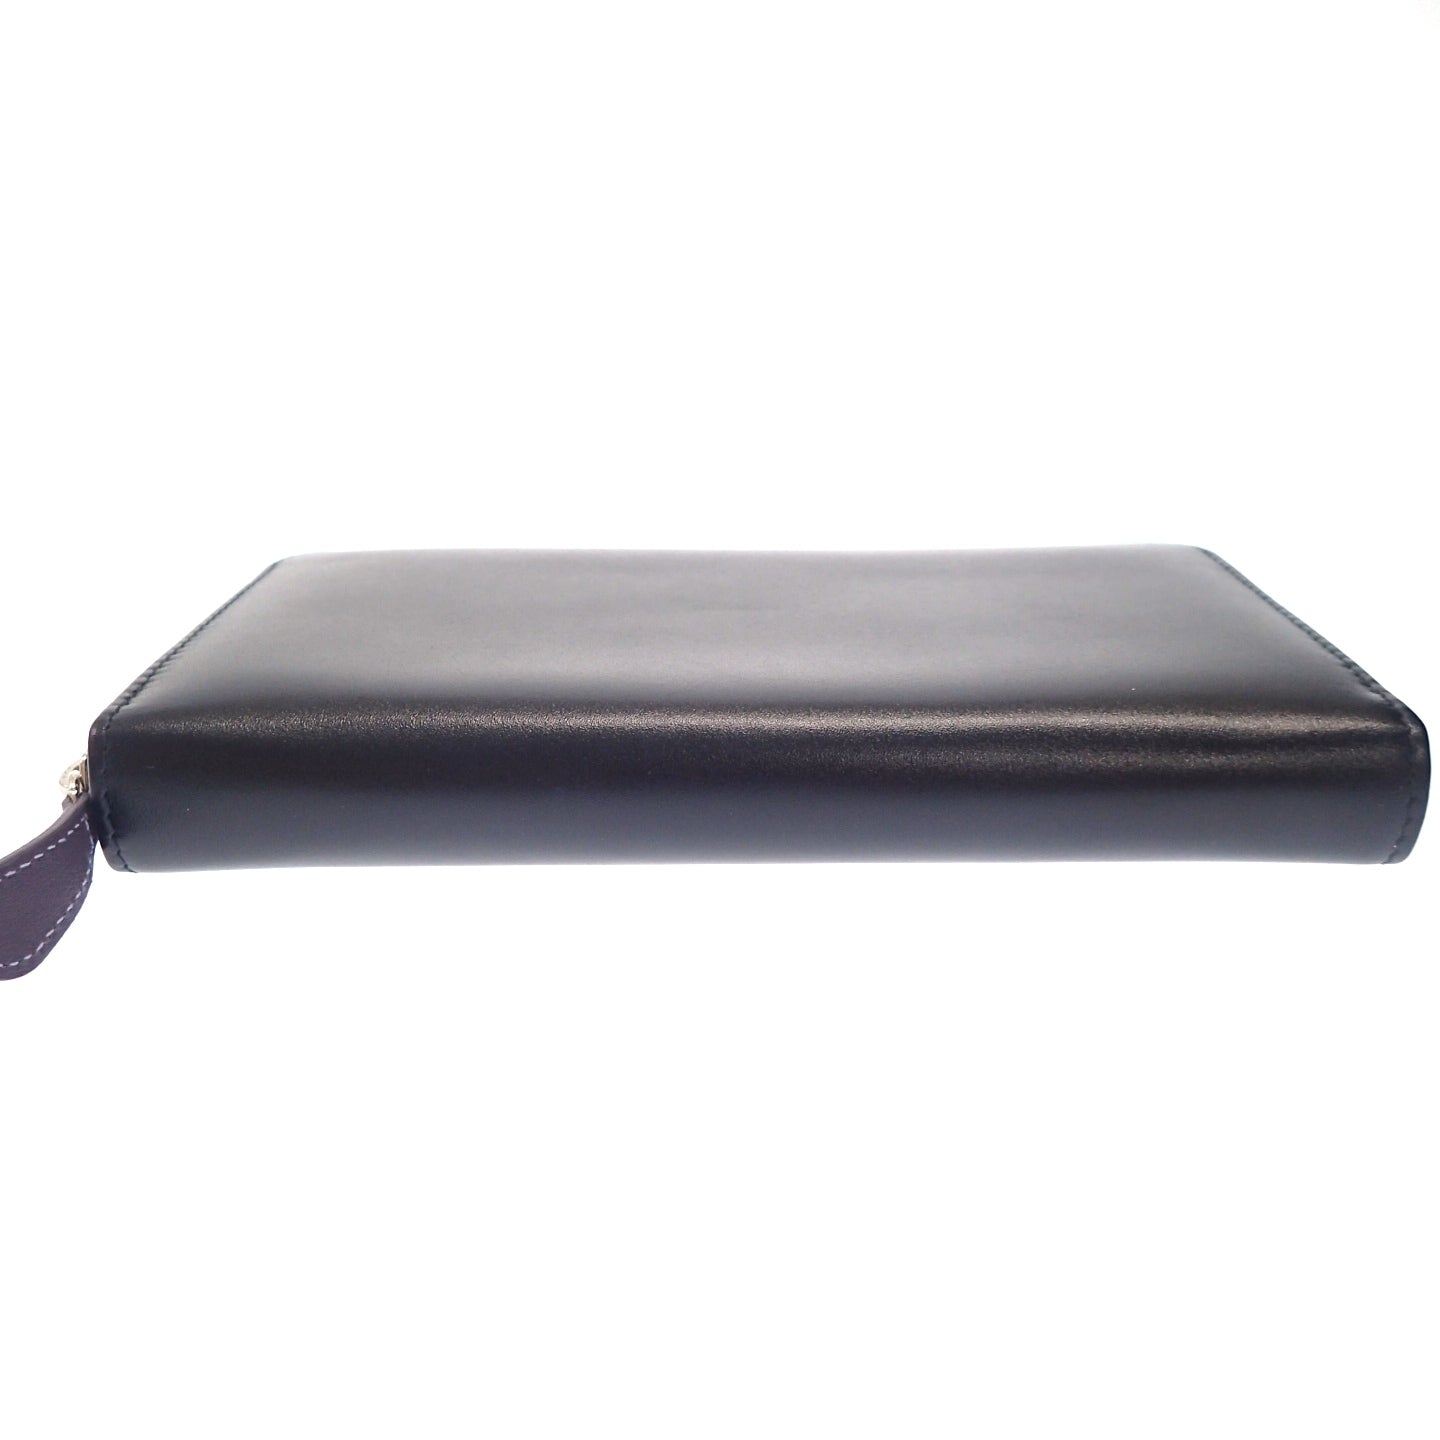 Ettinger long wallet round zip leather black x purple with box ETTINGER [AFI18] [Used] 